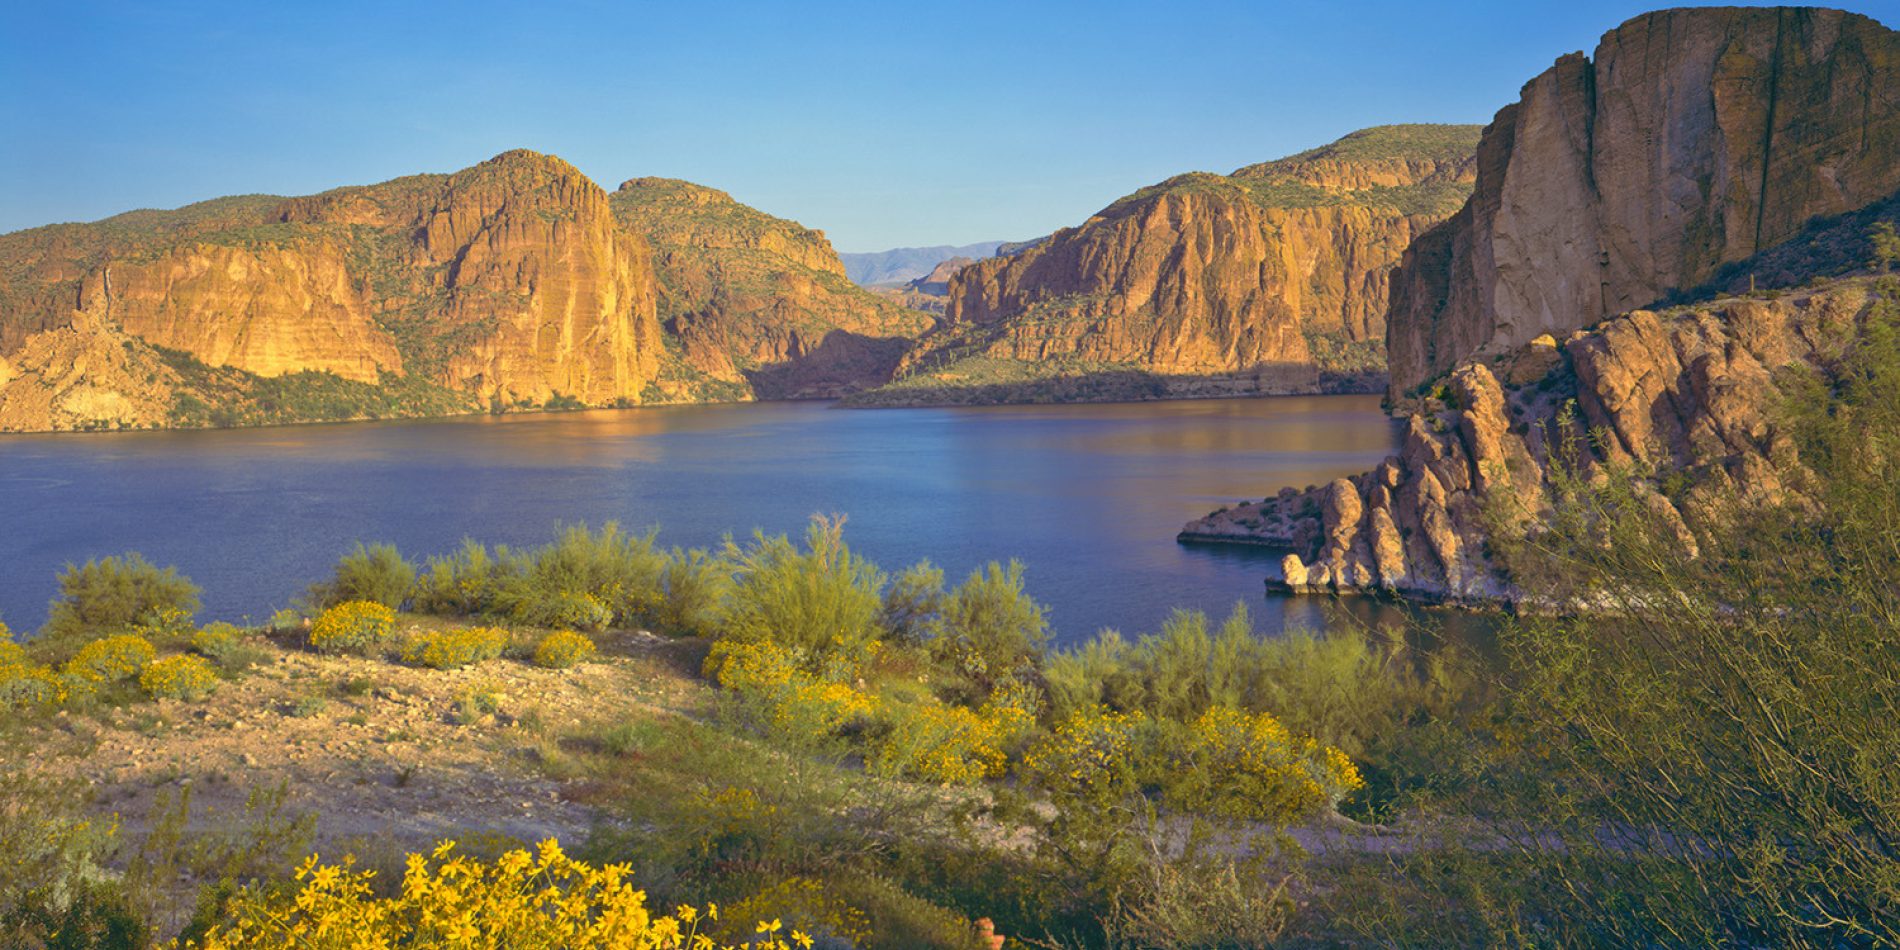 Canyon Lake Arizona on the Apache Trail is an excellent Carefree RV adventure near Queen Creek